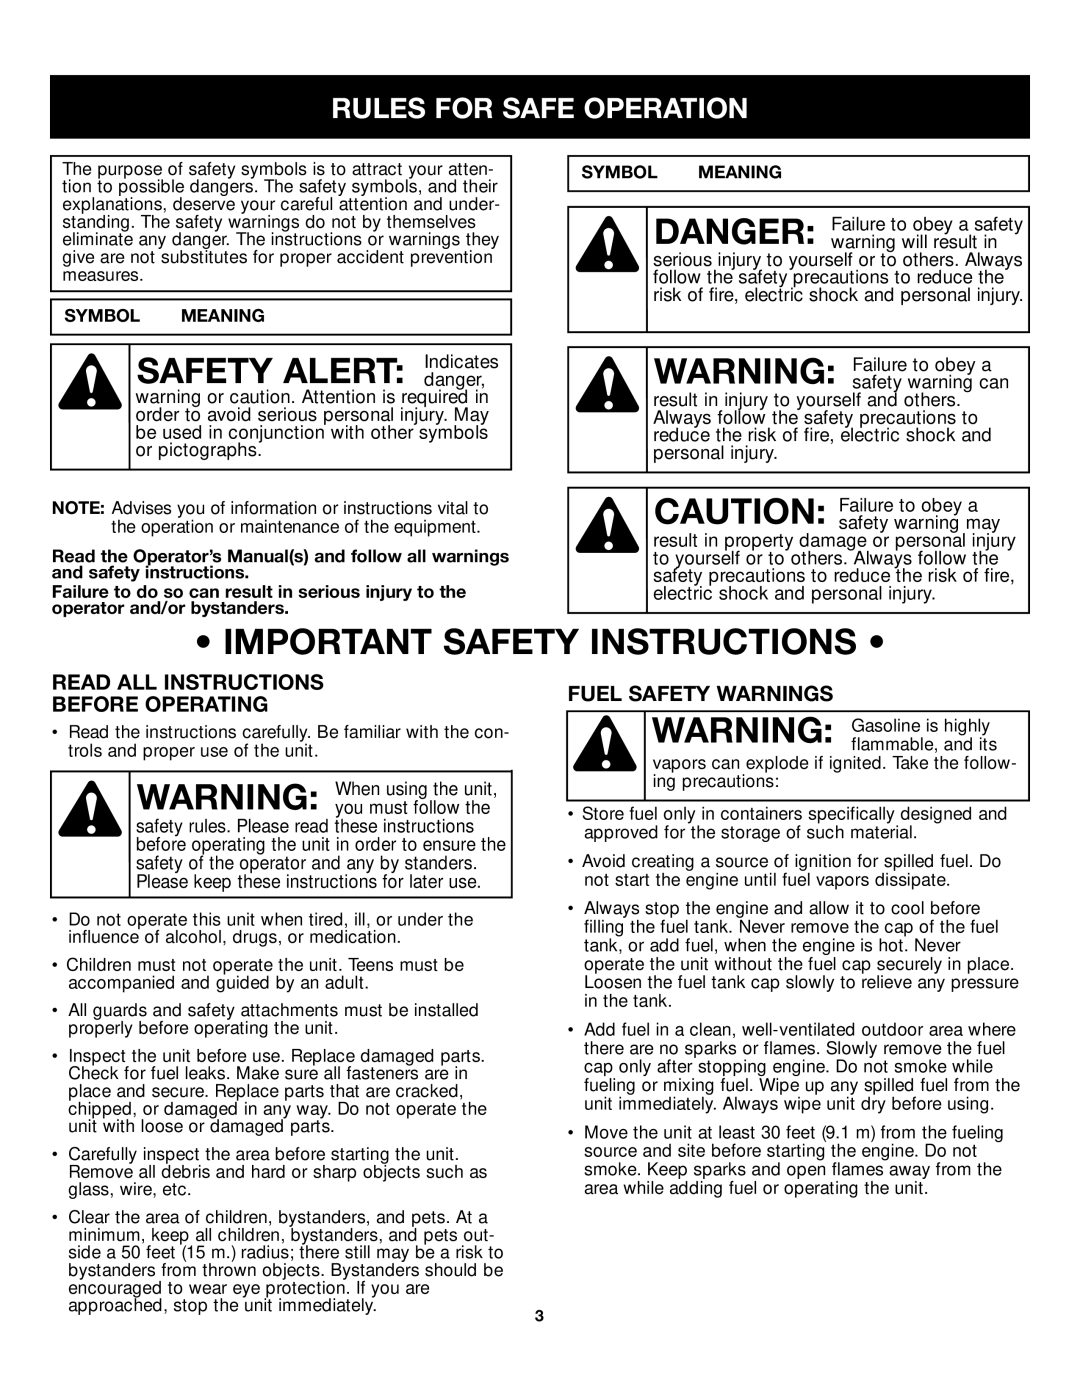 Craftsman 316.79499 manual Important Safety Instructions, Rules For Safe Operation, Read All Instructions Before Operating 